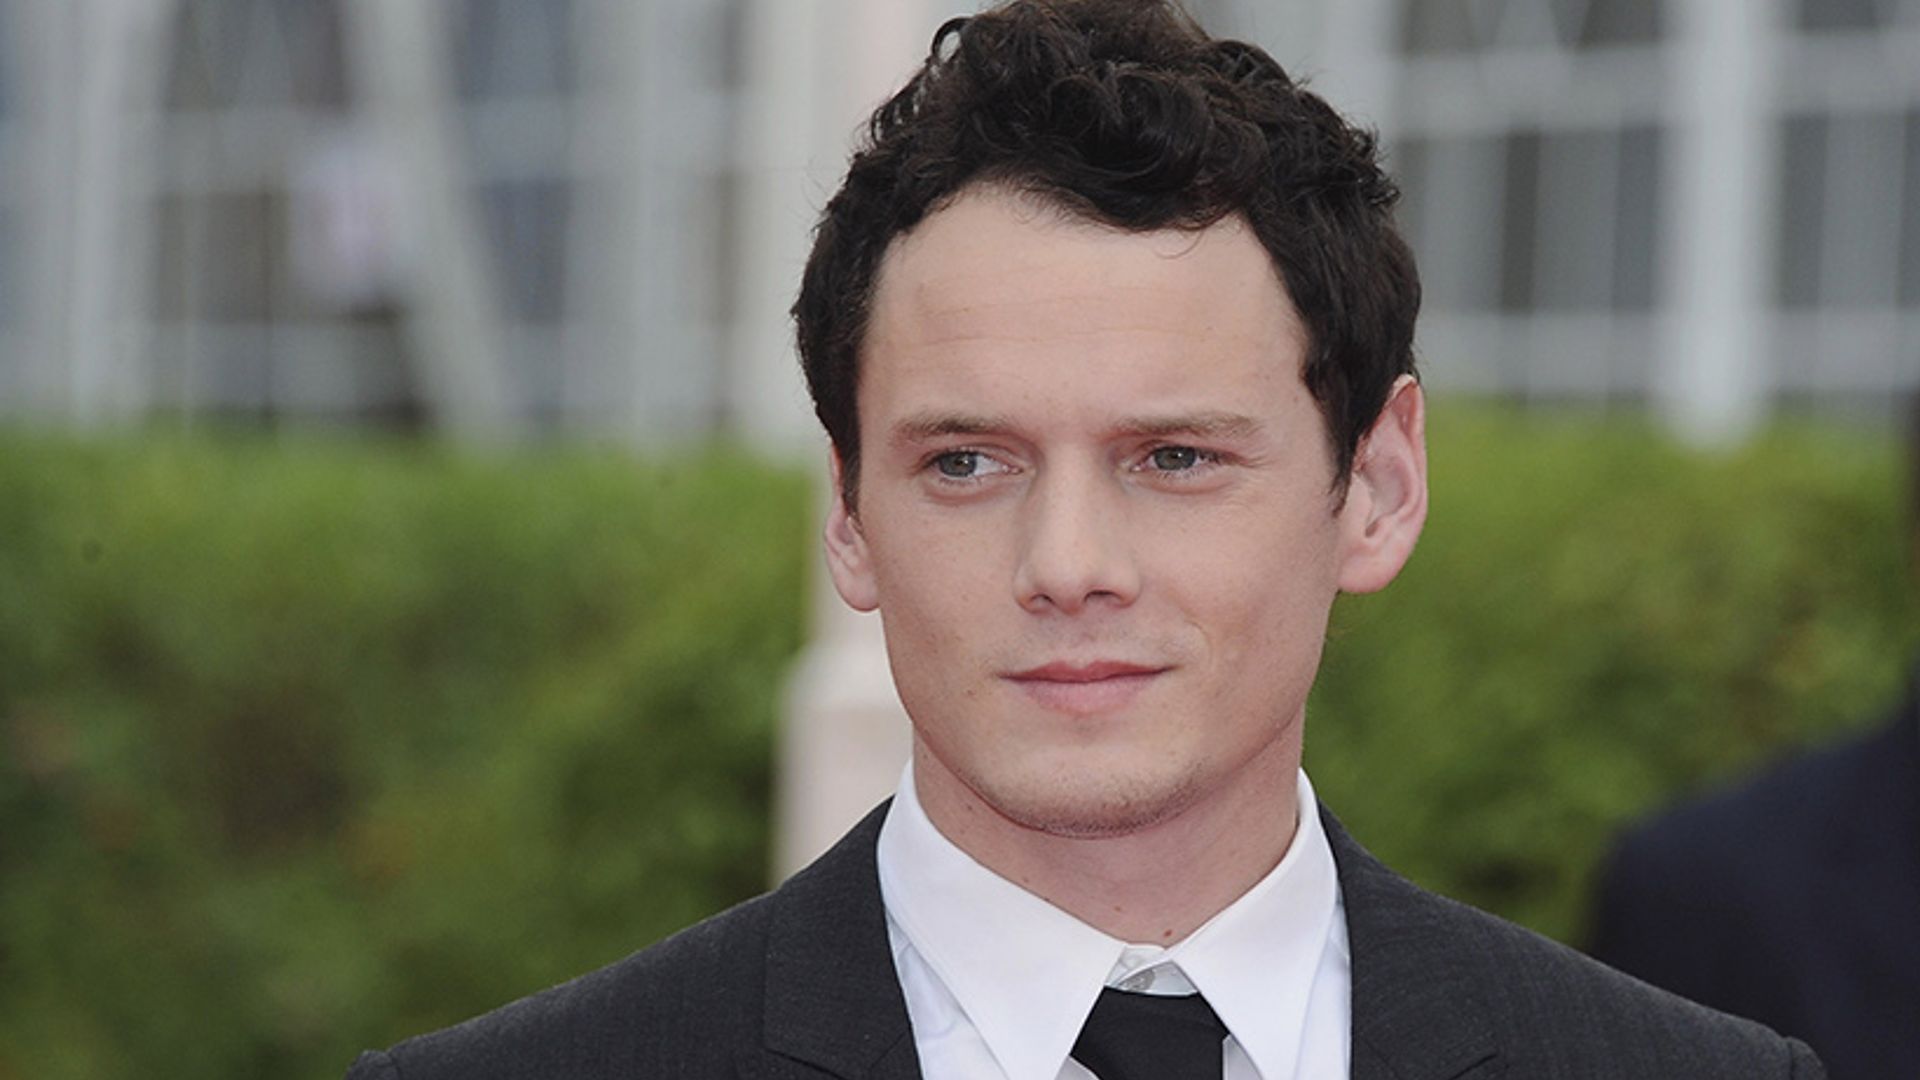 Friends and family attend funeral service for Anton Yelchin